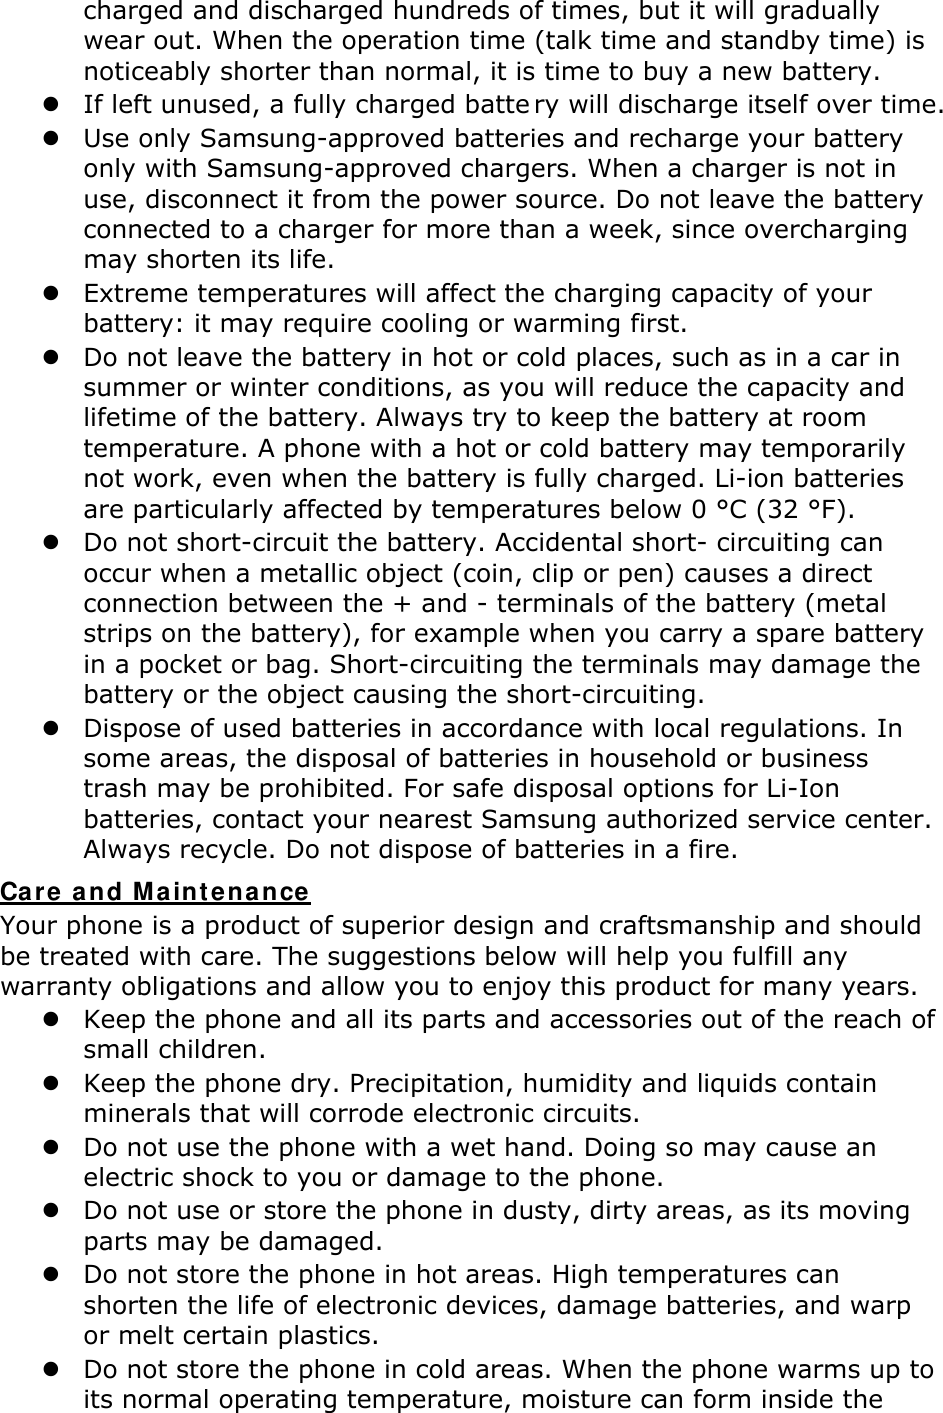 charged and discharged hundreds of times, but it will gradually wear out. When the operation time (talk time and standby time) is noticeably shorter than normal, it is time to buy a new battery. z If left unused, a fully charged batte ry will discharge itself over time.  z Use only Samsung-approved batteries and recharge your battery only with Samsung-approved chargers. When a charger is not in use, disconnect it from the power source. Do not leave the battery connected to a charger for more than a week, since overcharging may shorten its life. z Extreme temperatures will affect the charging capacity of your battery: it may require cooling or warming first. z Do not leave the battery in hot or cold places, such as in a car in summer or winter conditions, as you will reduce the capacity and lifetime of the battery. Always try to keep the battery at room temperature. A phone with a hot or cold battery may temporarily not work, even when the battery is fully charged. Li-ion batteries are particularly affected by temperatures below 0 °C (32 °F). z Do not short-circuit the battery. Accidental short- circuiting can occur when a metallic object (coin, clip or pen) causes a direct connection between the + and - terminals of the battery (metal strips on the battery), for example when you carry a spare battery in a pocket or bag. Short-circuiting the terminals may damage the battery or the object causing the short-circuiting. z Dispose of used batteries in accordance with local regulations. In some areas, the disposal of batteries in household or business trash may be prohibited. For safe disposal options for Li-Ion batteries, contact your nearest Samsung authorized service center. Always recycle. Do not dispose of batteries in a fire. Care a nd Ma int enance Your phone is a product of superior design and craftsmanship and should be treated with care. The suggestions below will help you fulfill any warranty obligations and allow you to enjoy this product for many years. z Keep the phone and all its parts and accessories out of the reach of small children. z Keep the phone dry. Precipitation, humidity and liquids contain minerals that will corrode electronic circuits. z Do not use the phone with a wet hand. Doing so may cause an electric shock to you or damage to the phone. z Do not use or store the phone in dusty, dirty areas, as its moving parts may be damaged. z Do not store the phone in hot areas. High temperatures can shorten the life of electronic devices, damage batteries, and warp or melt certain plastics. z Do not store the phone in cold areas. When the phone warms up to its normal operating temperature, moisture can form inside the 